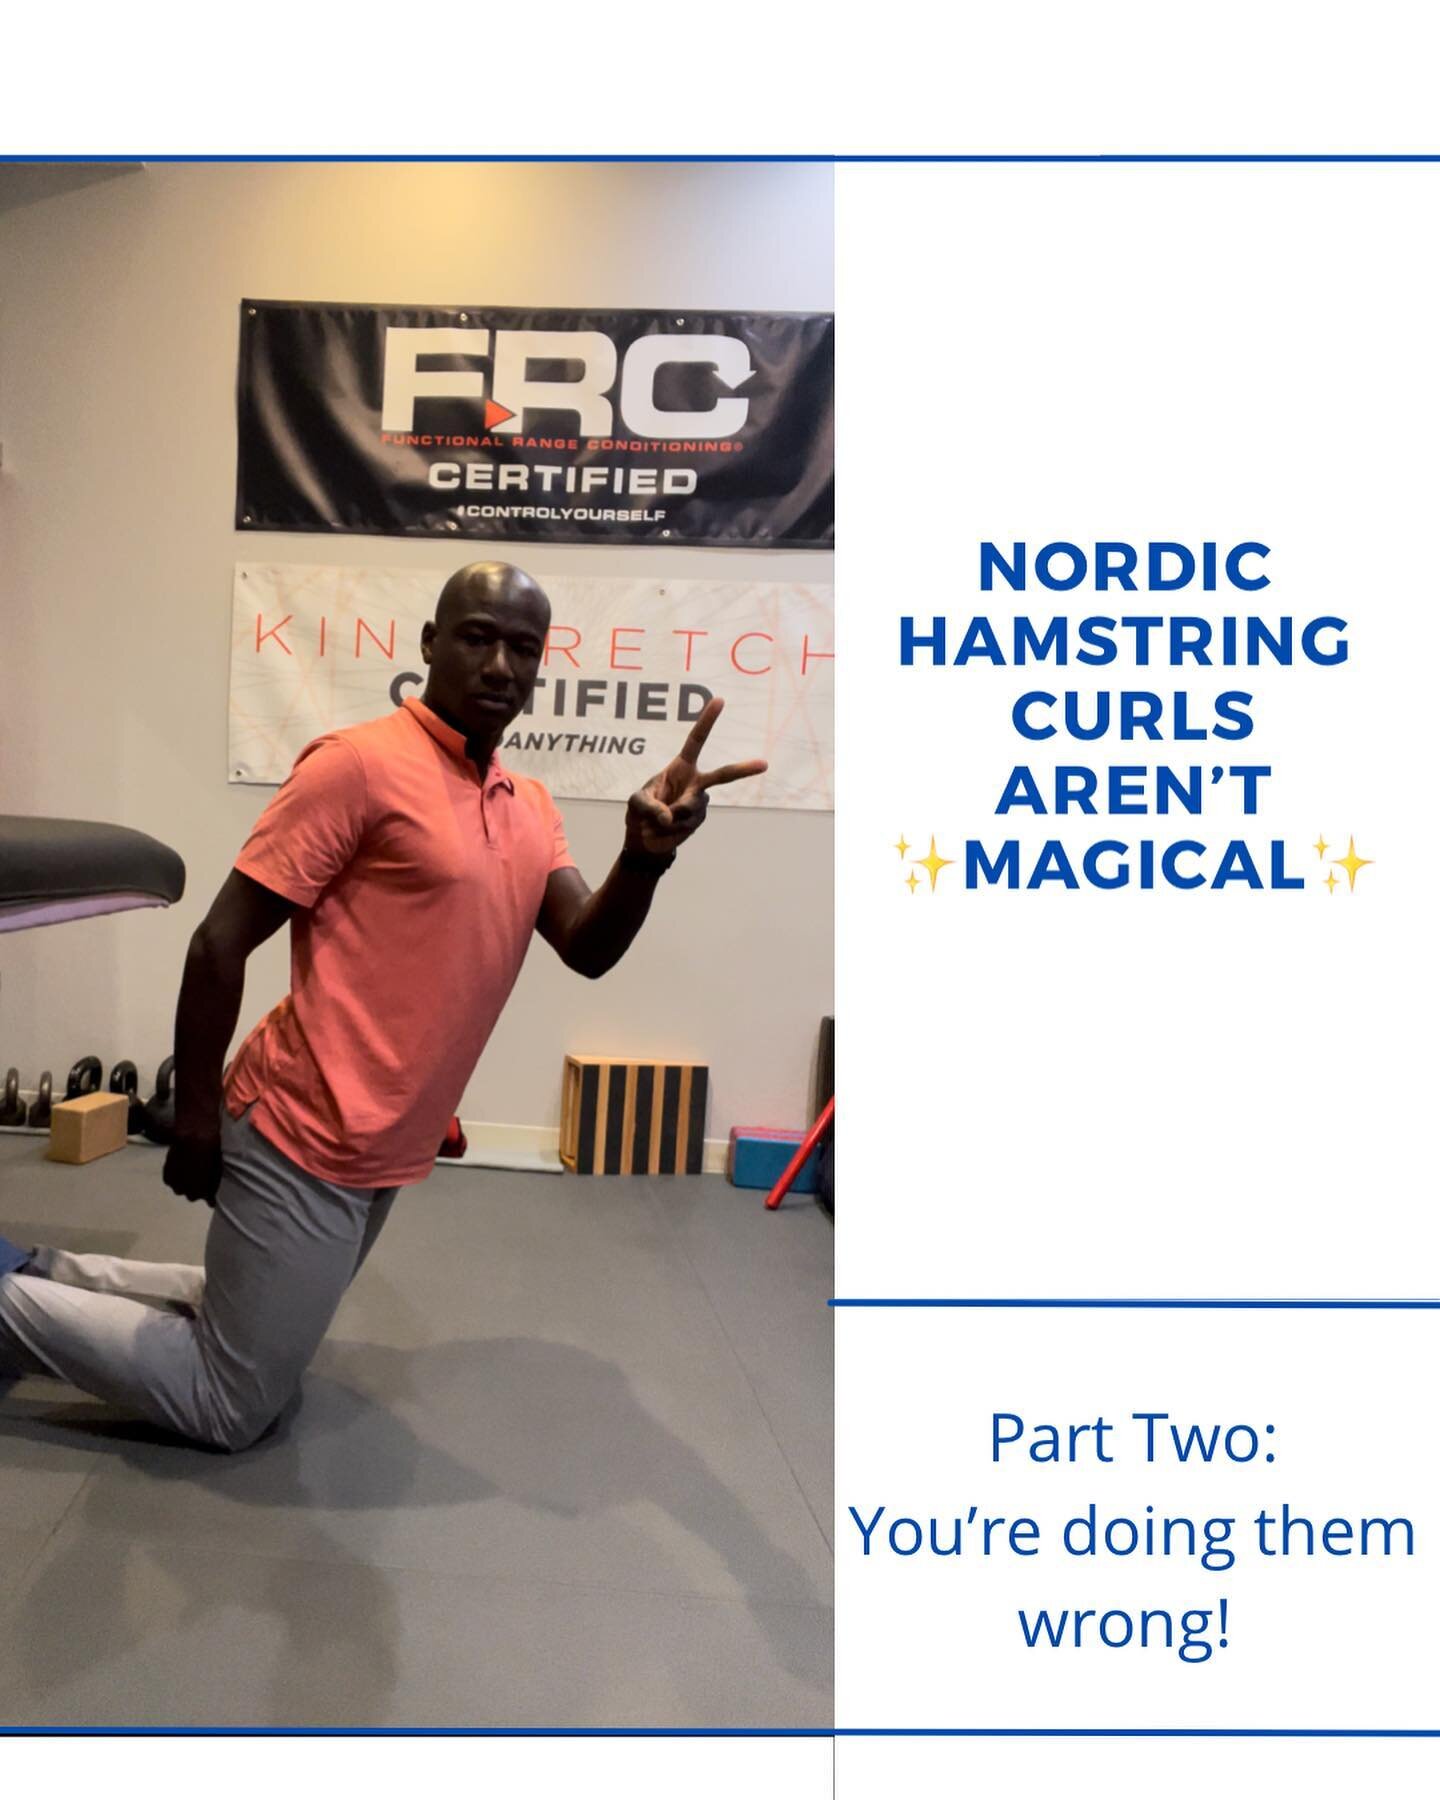 Nordic Hamstring Curls aren&rsquo;t ✨magical✨
⠀
This is part two of a three part series on Nordic hamstring curls.
⠀
Part Two: You&rsquo;re doing them wrong!
⠀
In part one, we discussed the origins of the research on the Nordic hamstring curl, and wh